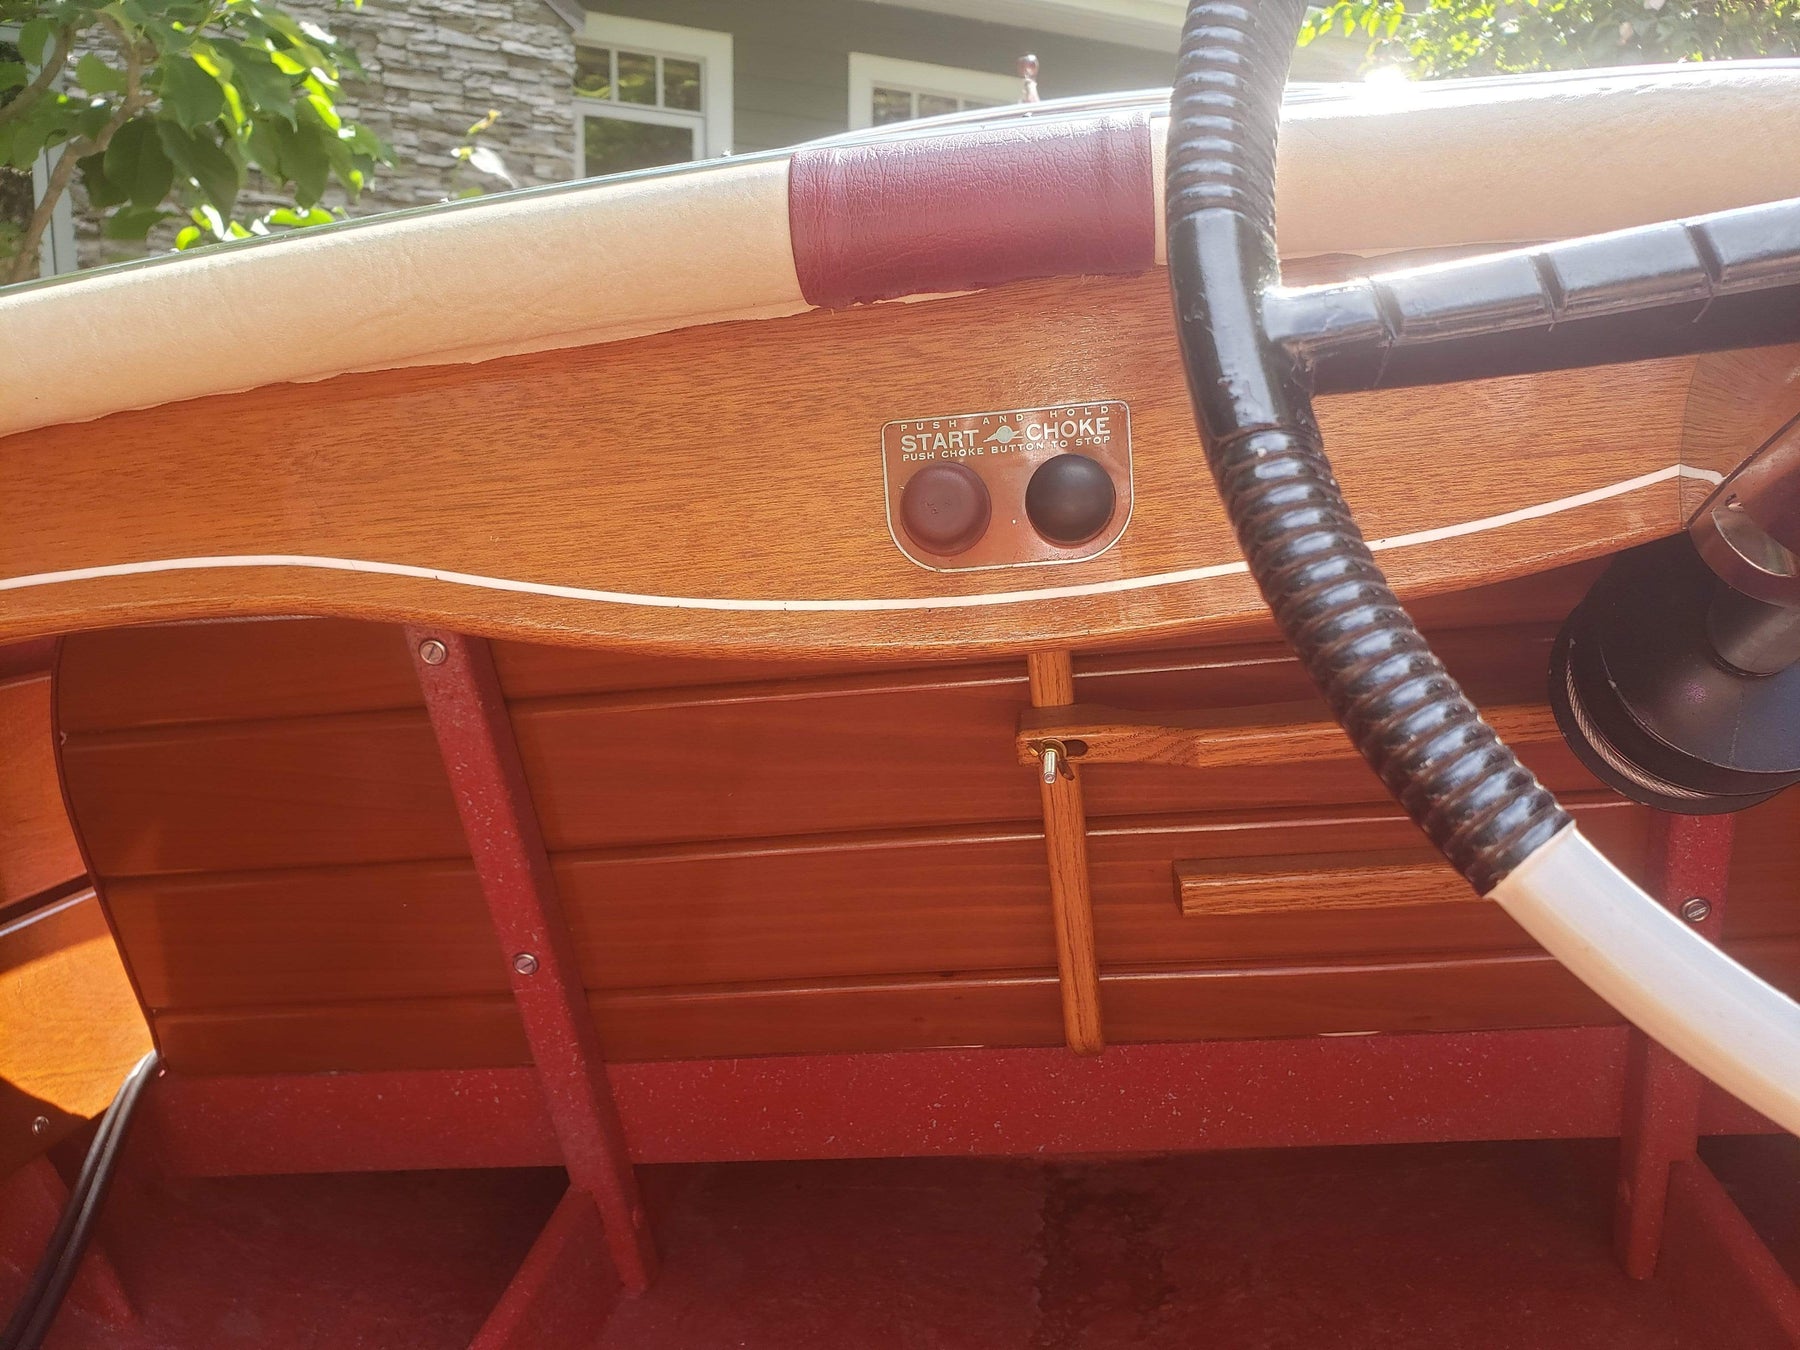 Classic Wooden Boat for Sale -  1956 LARSON - FALLS FLYER 14'